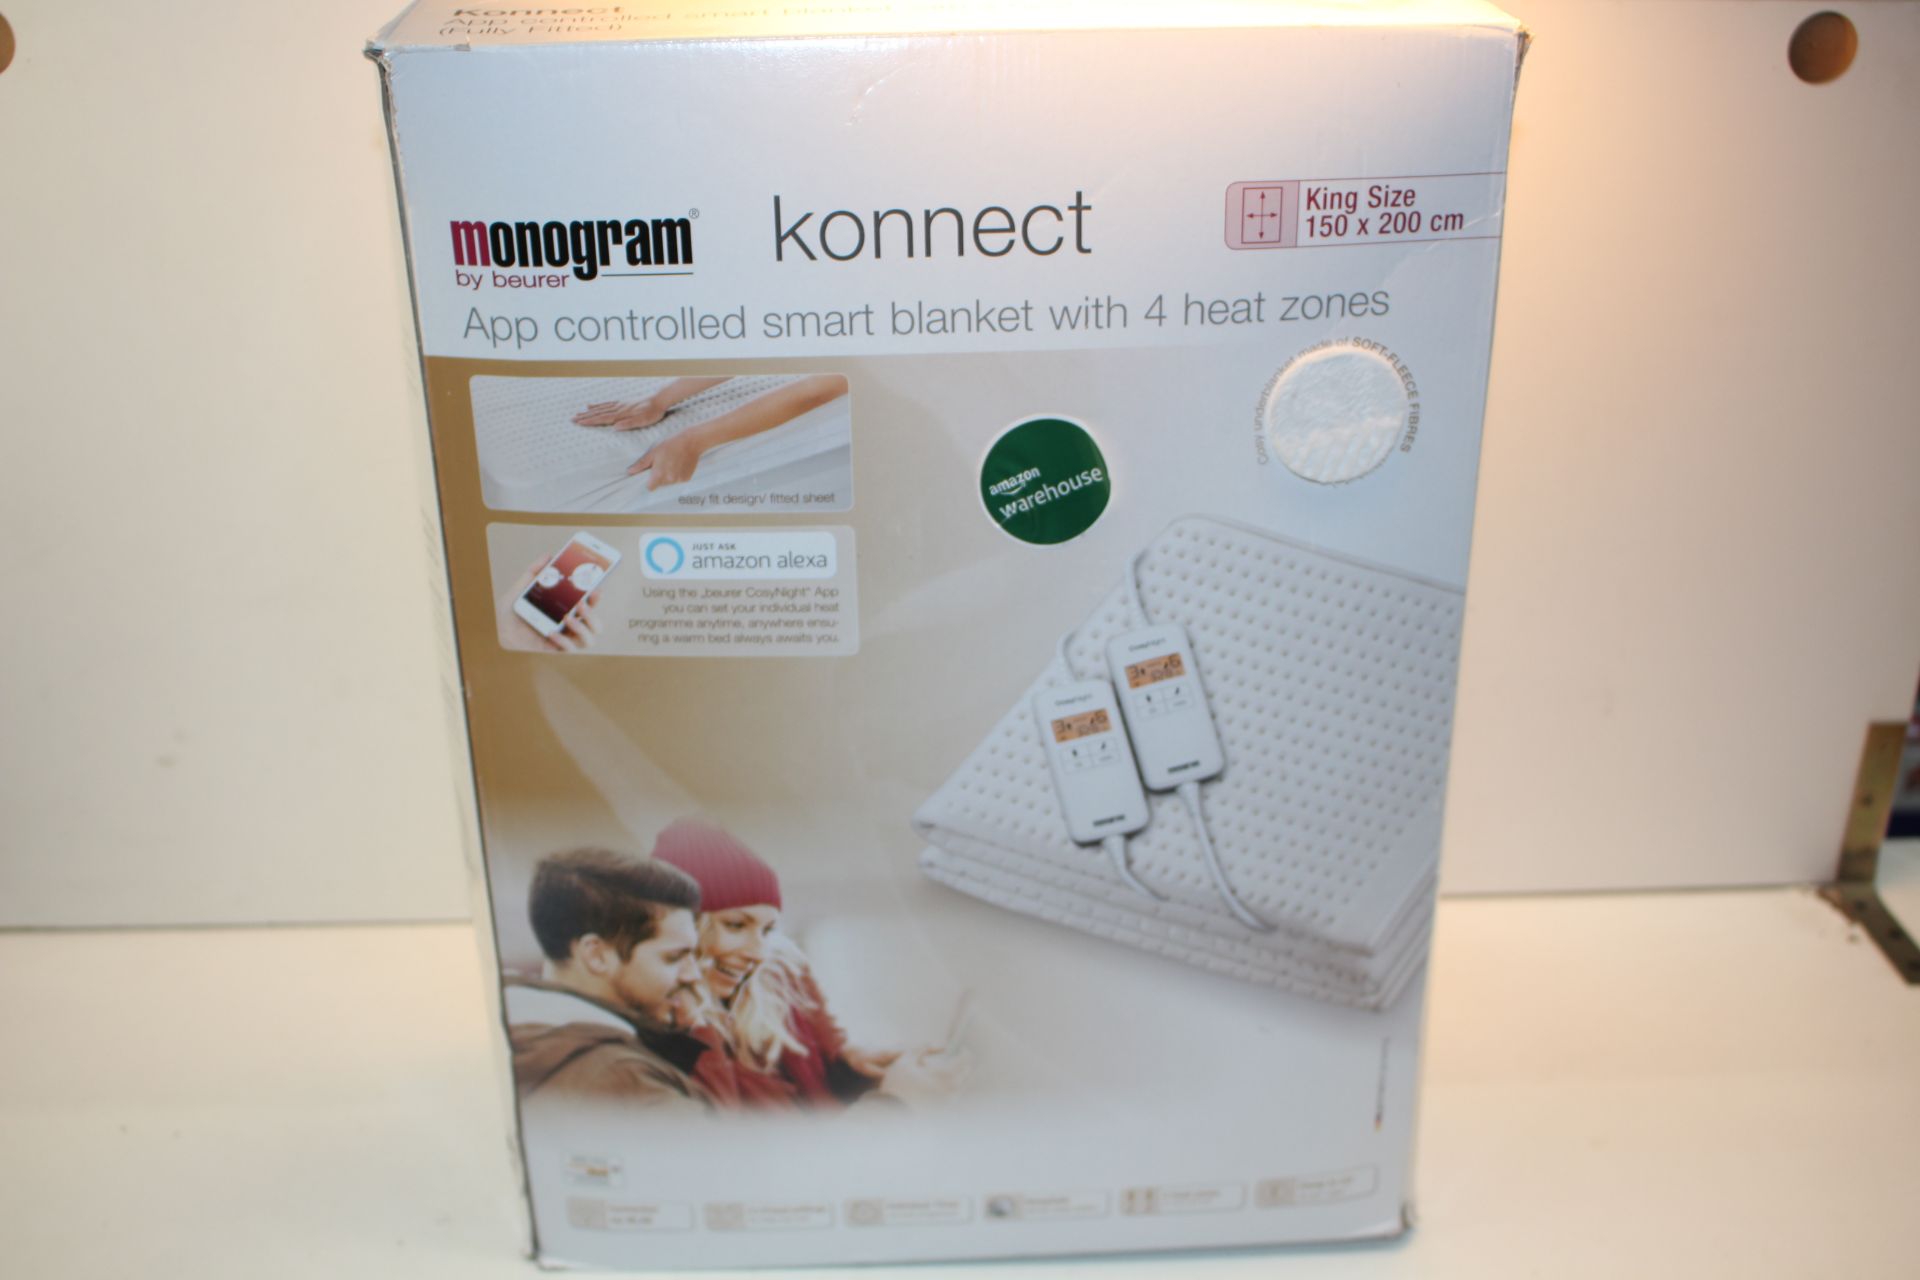 BOXED MONOGRAM BY BEURER KONNECT APP CONTROLLED SMART BLANKET WITH 4 HEAT ZONES KING SIZE RRP £204.